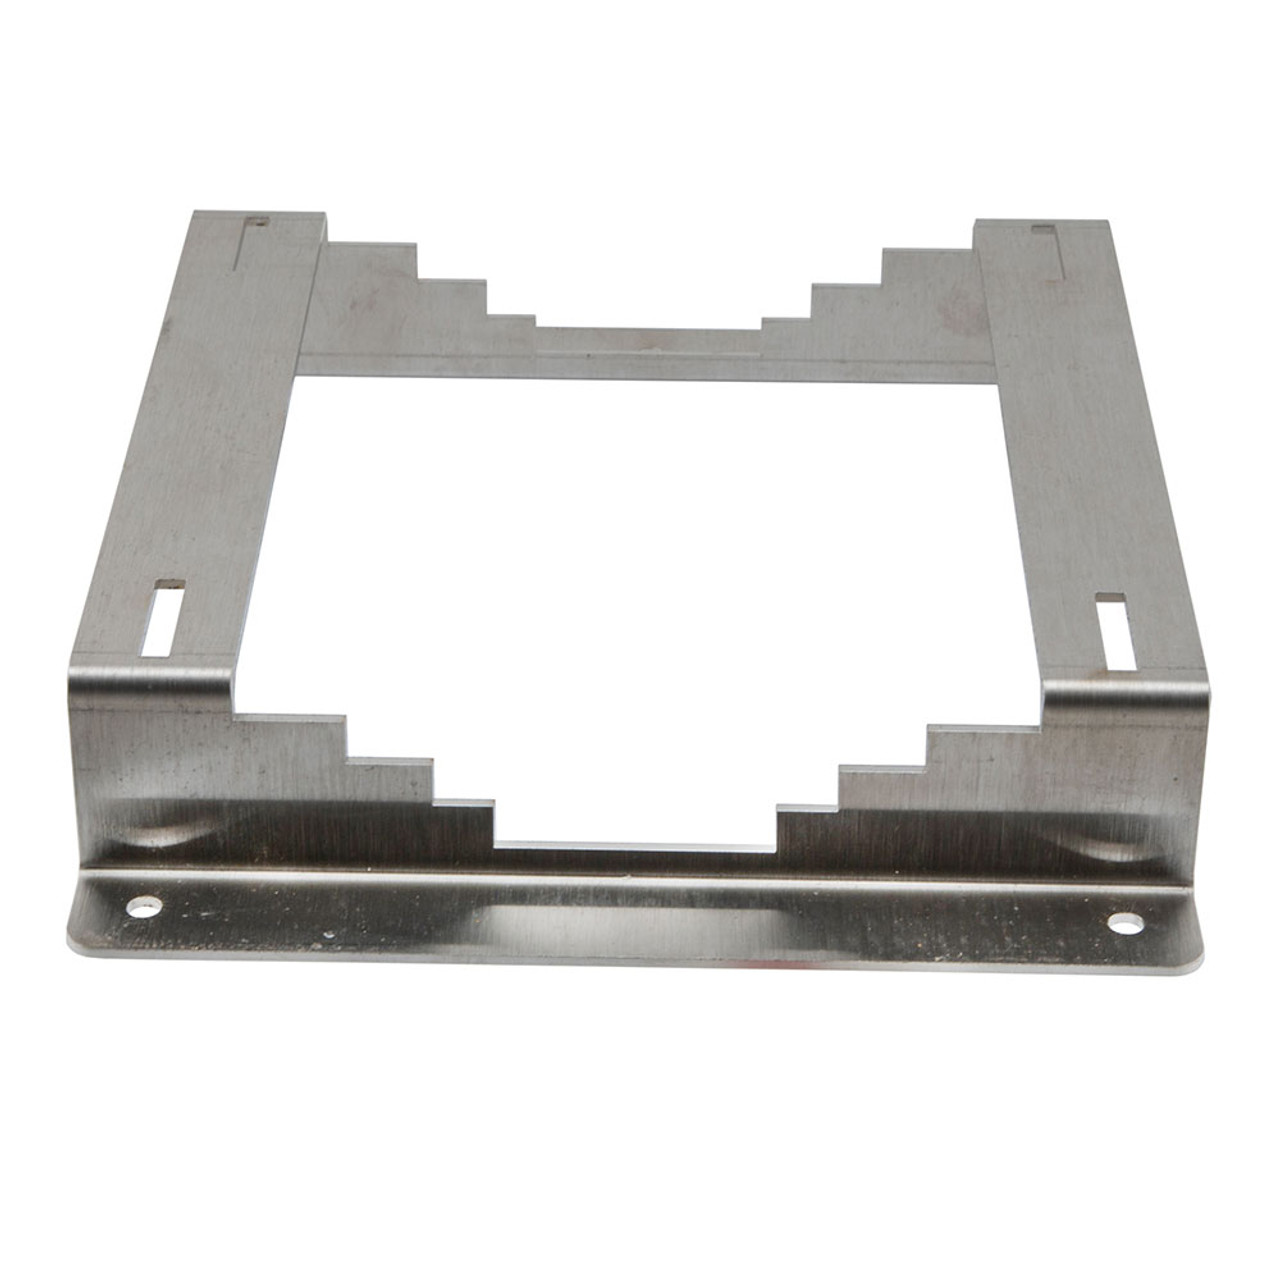 NavePoint Pole Mount Bracket, For 14X10X04 Enclosures, Fits 3-12 Inch  NavePoint Poles